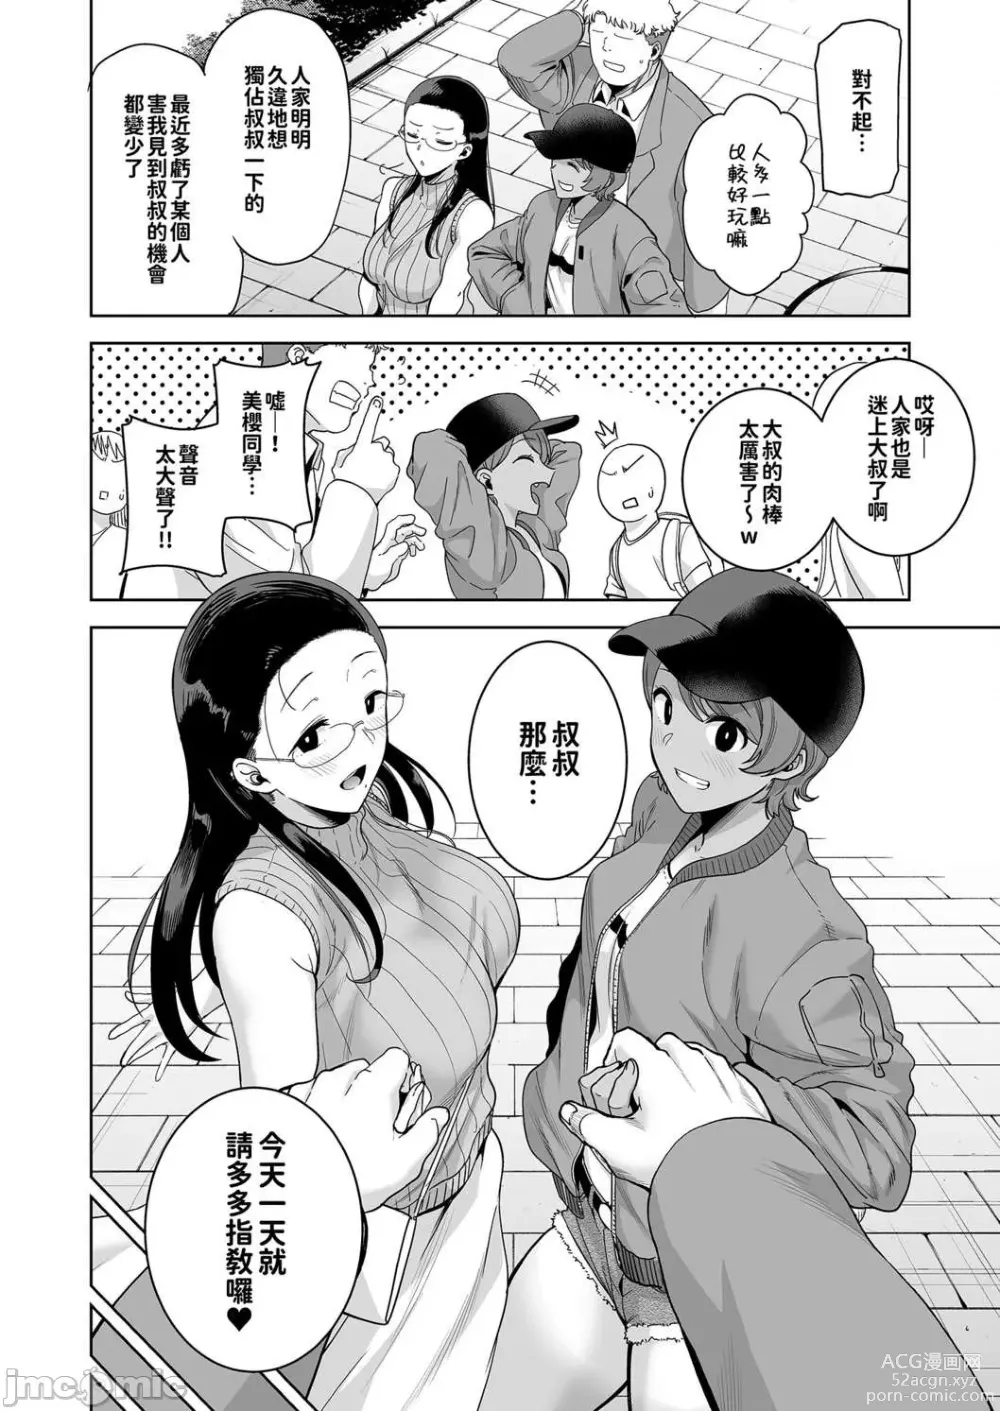 Page 6 of doujinshi 聖華女学院高等部公認竿おじさん 3